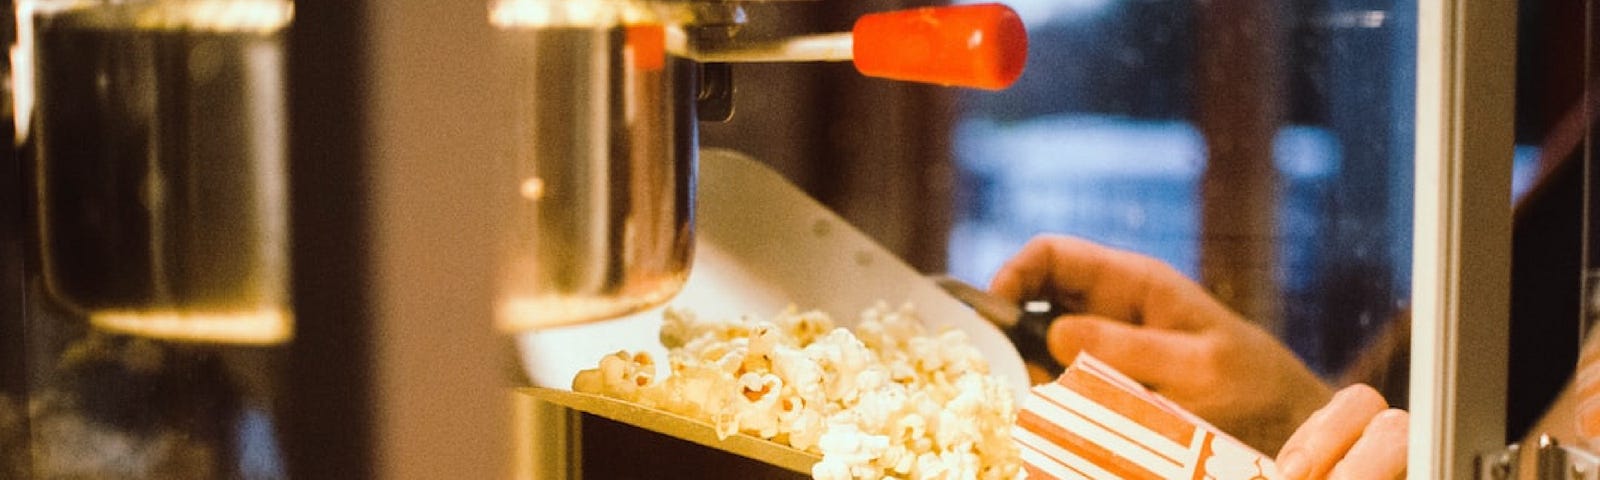 Server scoops popcorn out of machine at a movie theatre